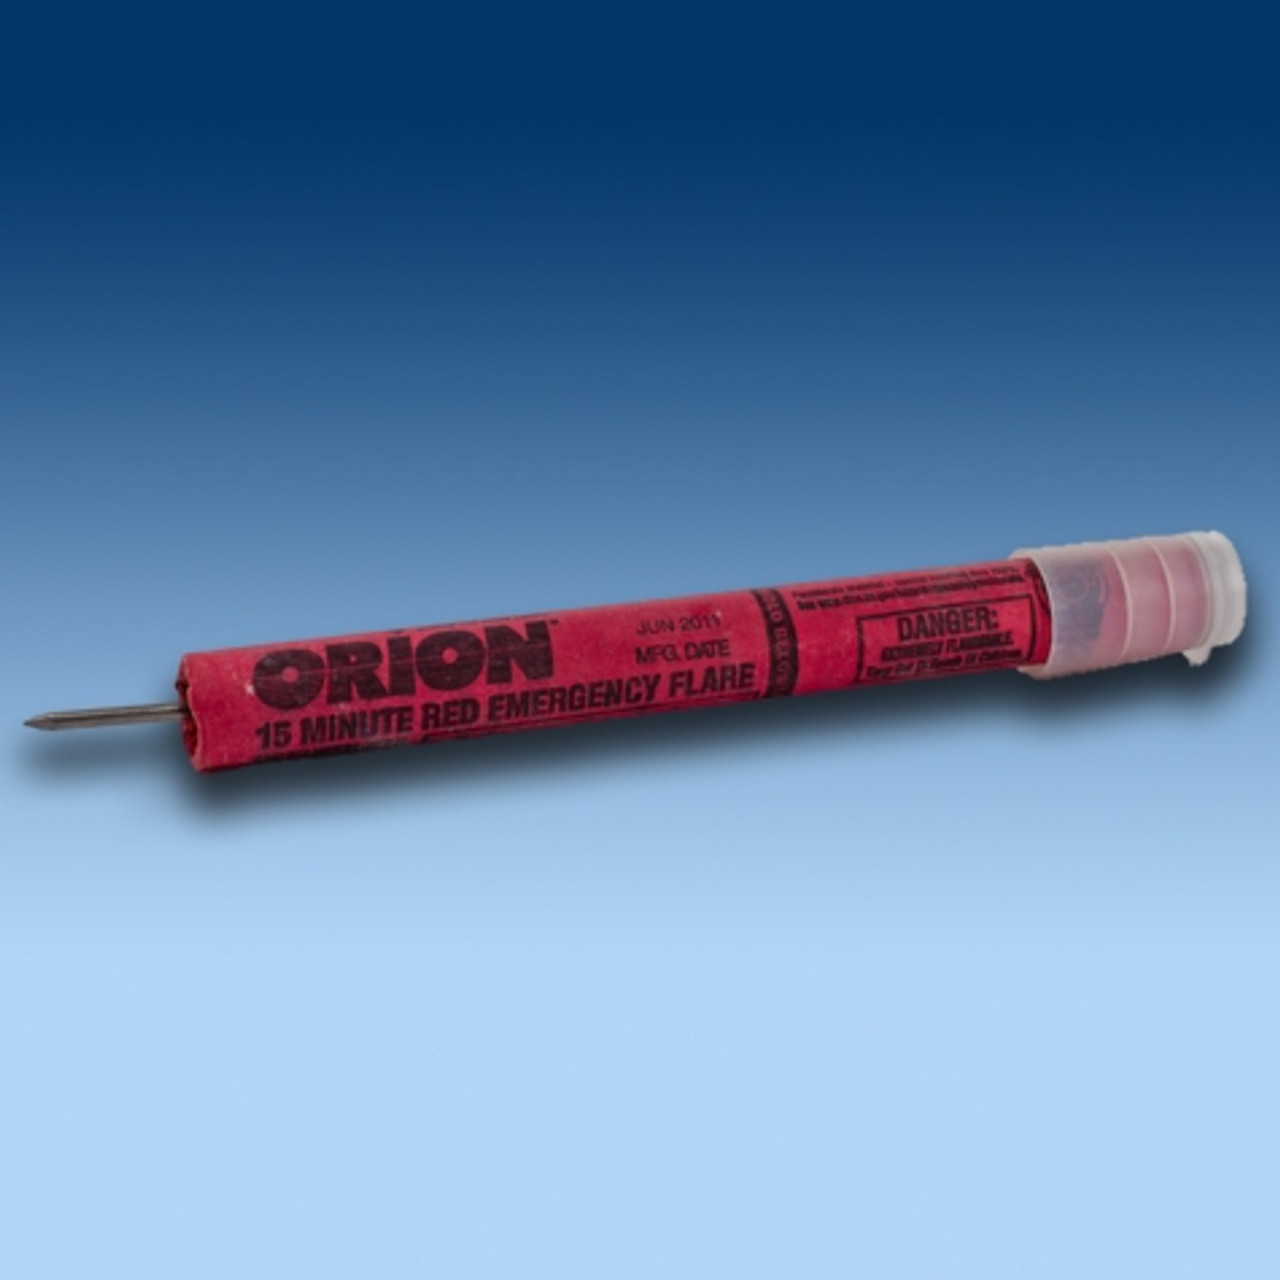 Orion 2715 Red Waxed Plastic Cap Spike Emergency Road Flare - Western Safety